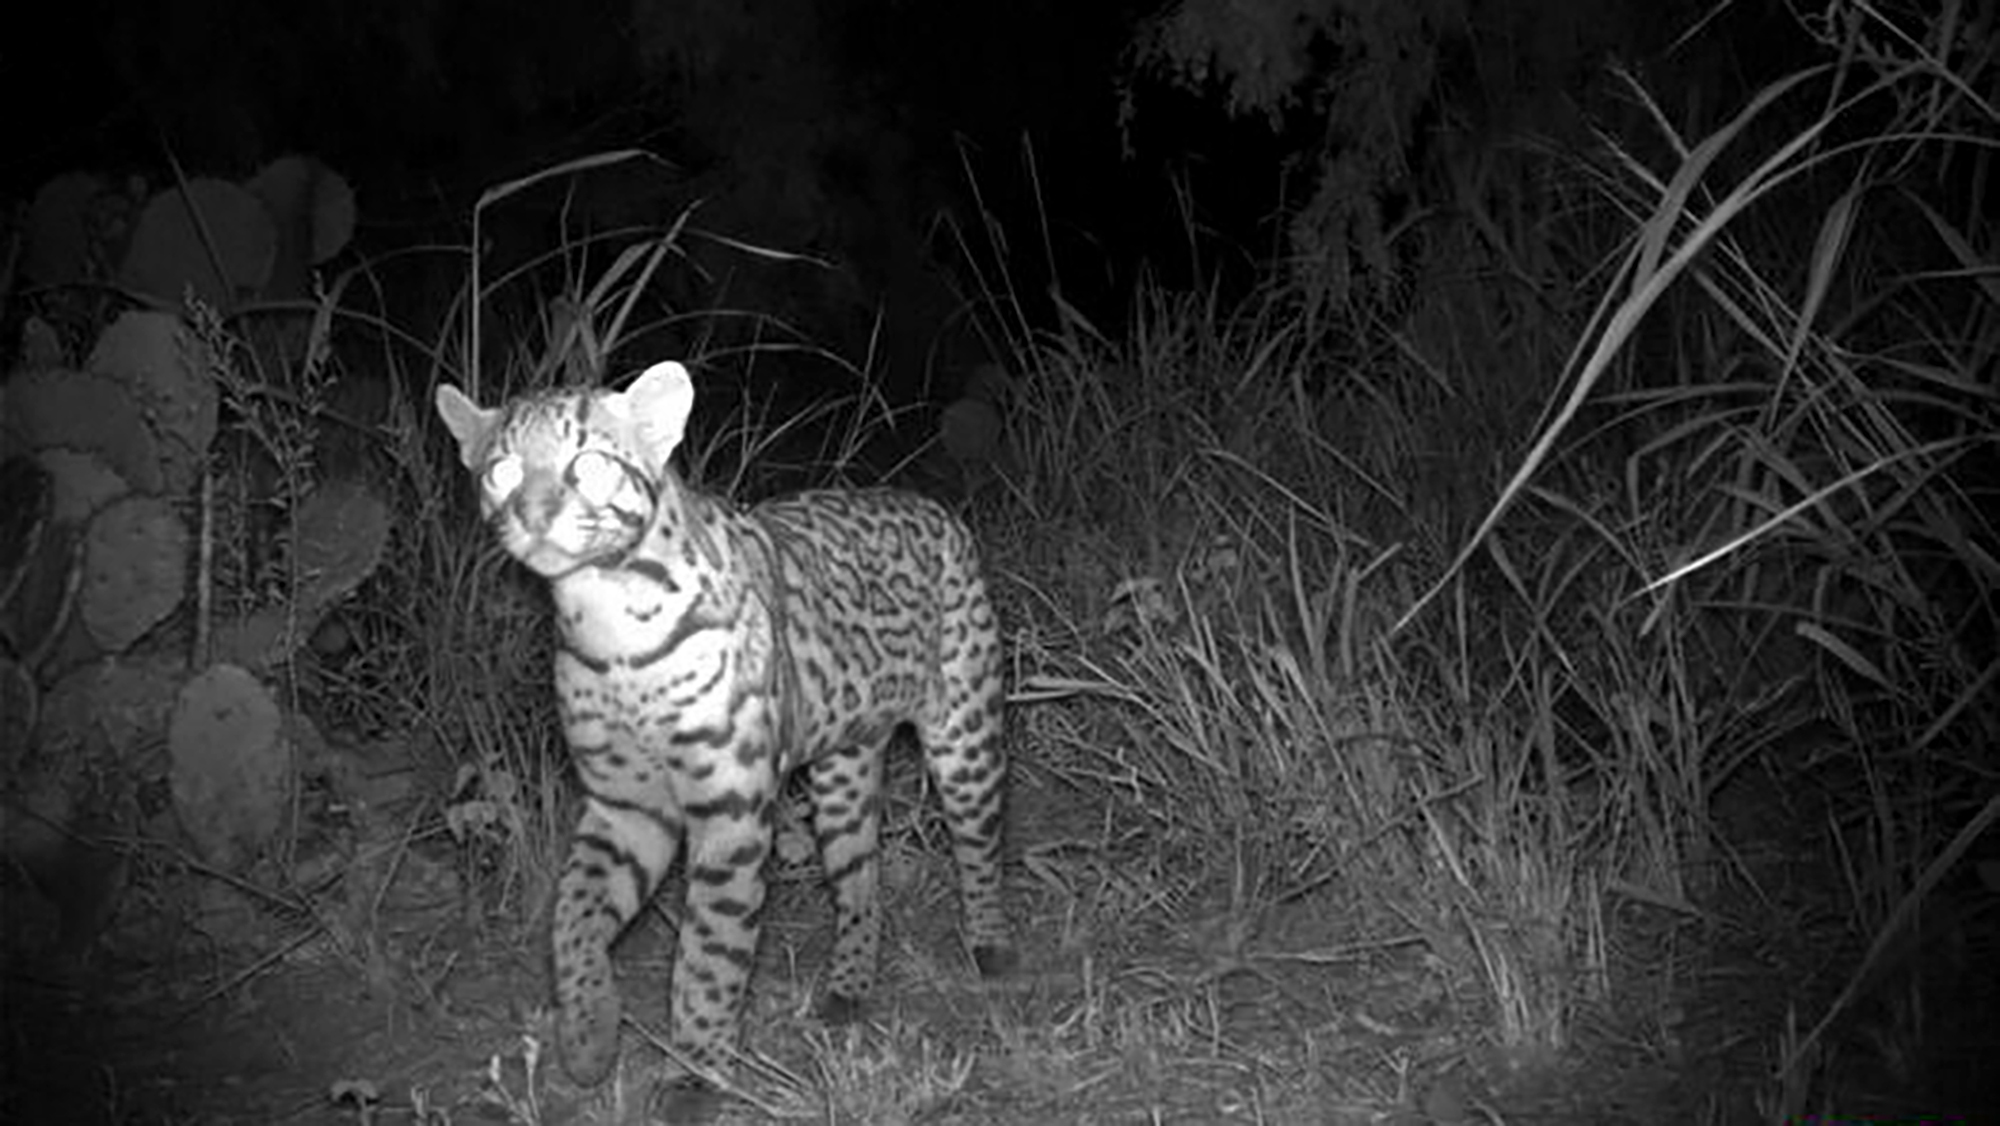 Wildlife exits on Texas roads could help endangered ocelots